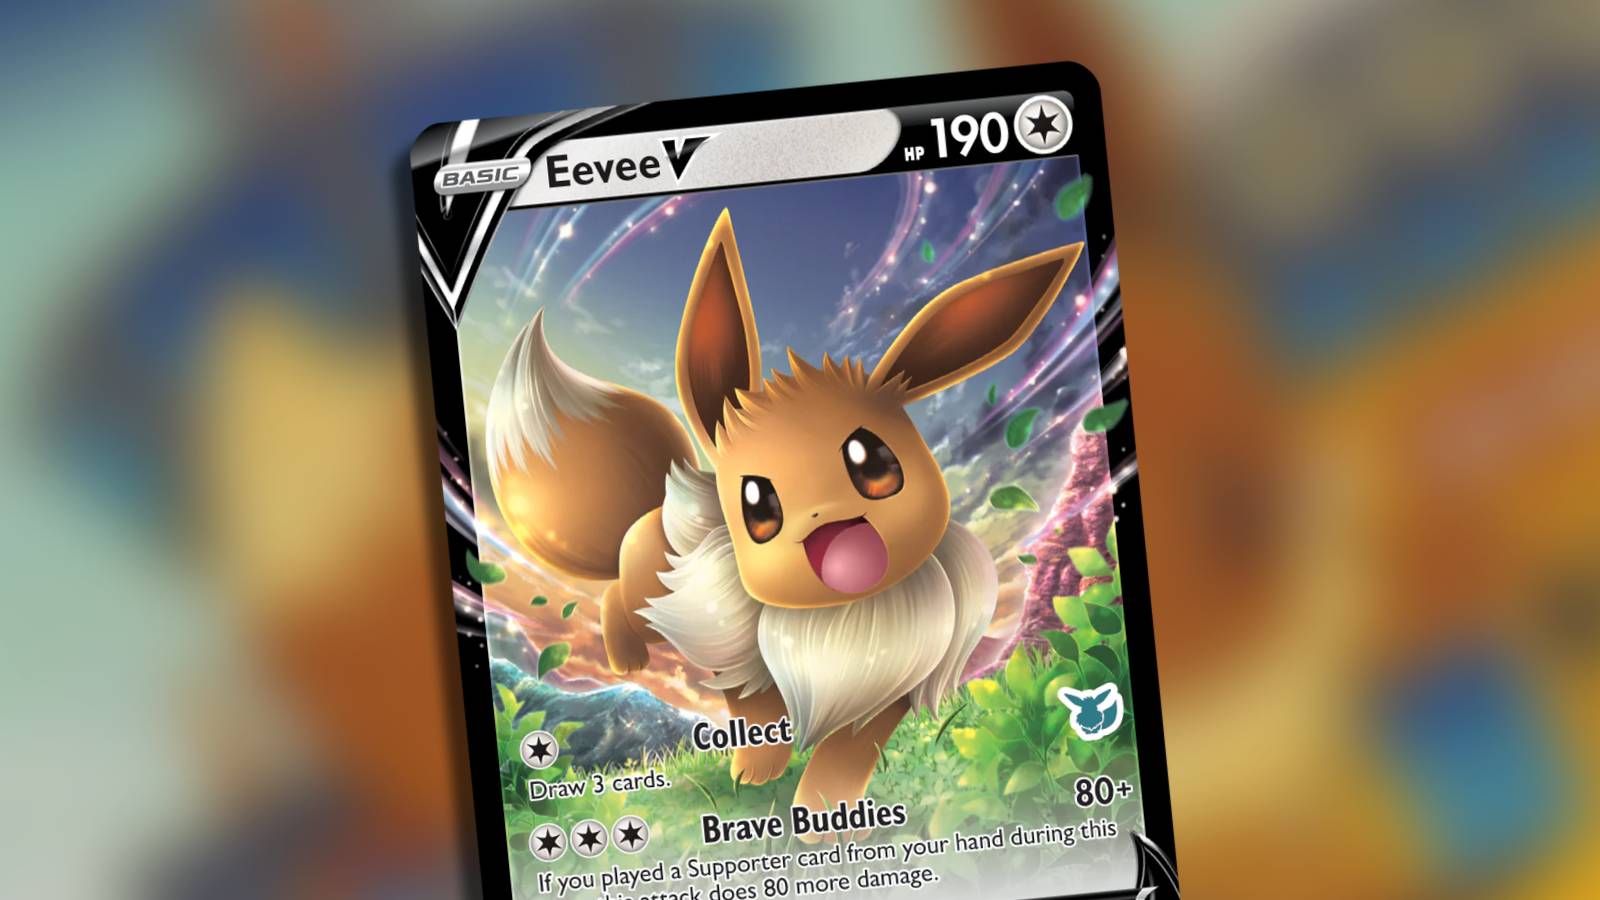 An Eevee Pokemon card is visible against a blurred background